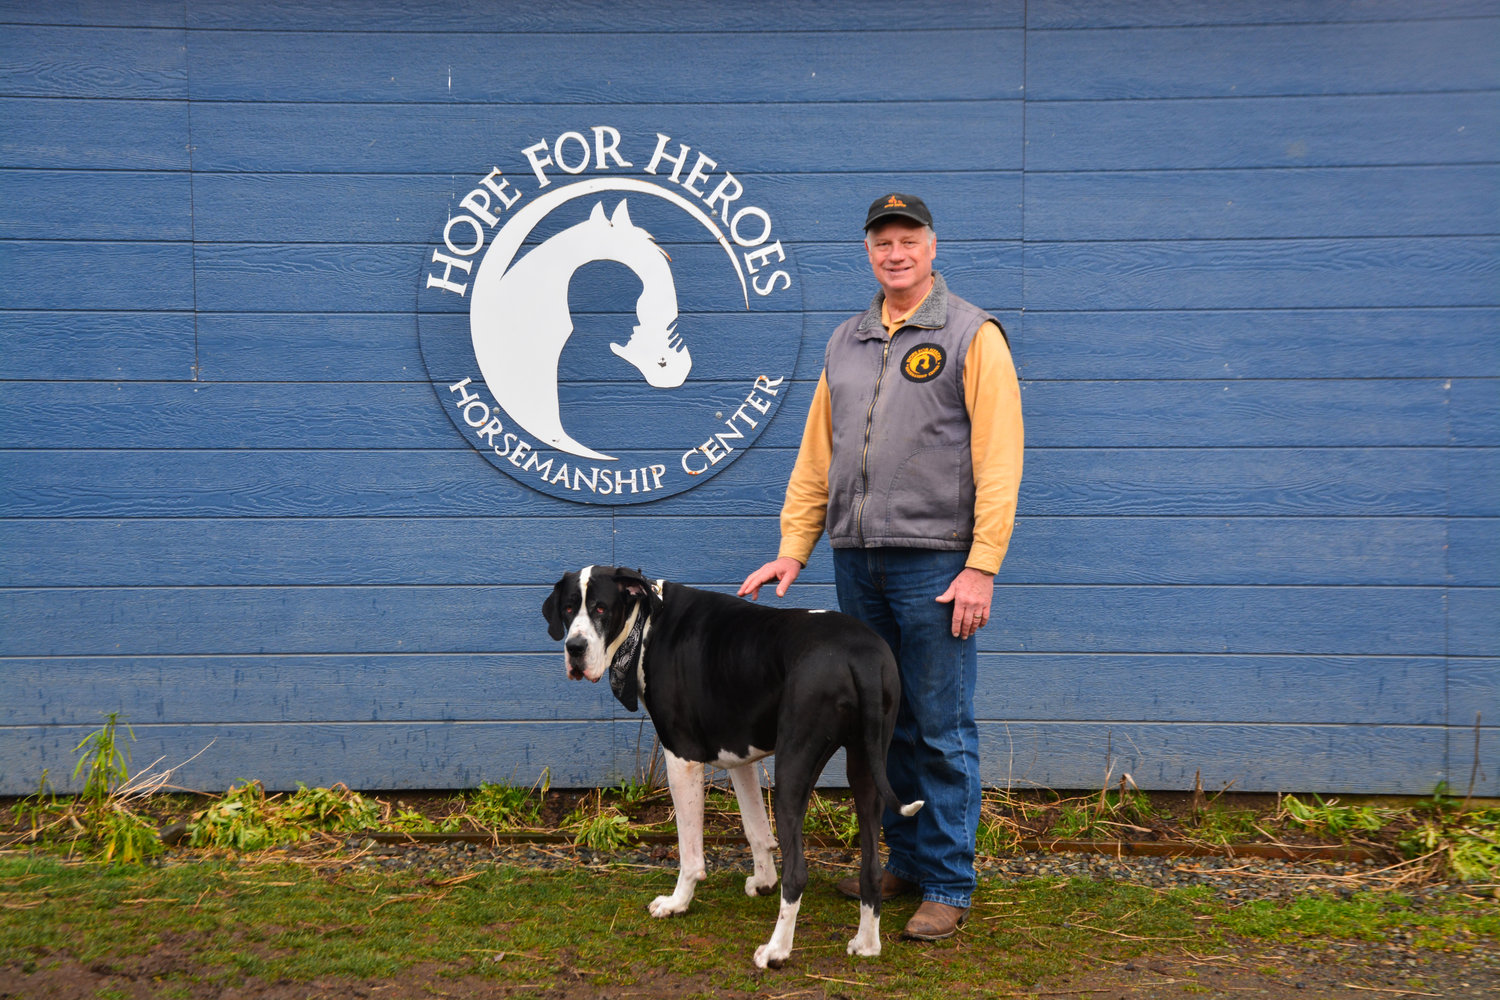 Bob Woelk poses with his dog Junior in front of a Hope for Heroes sign on a tack room.